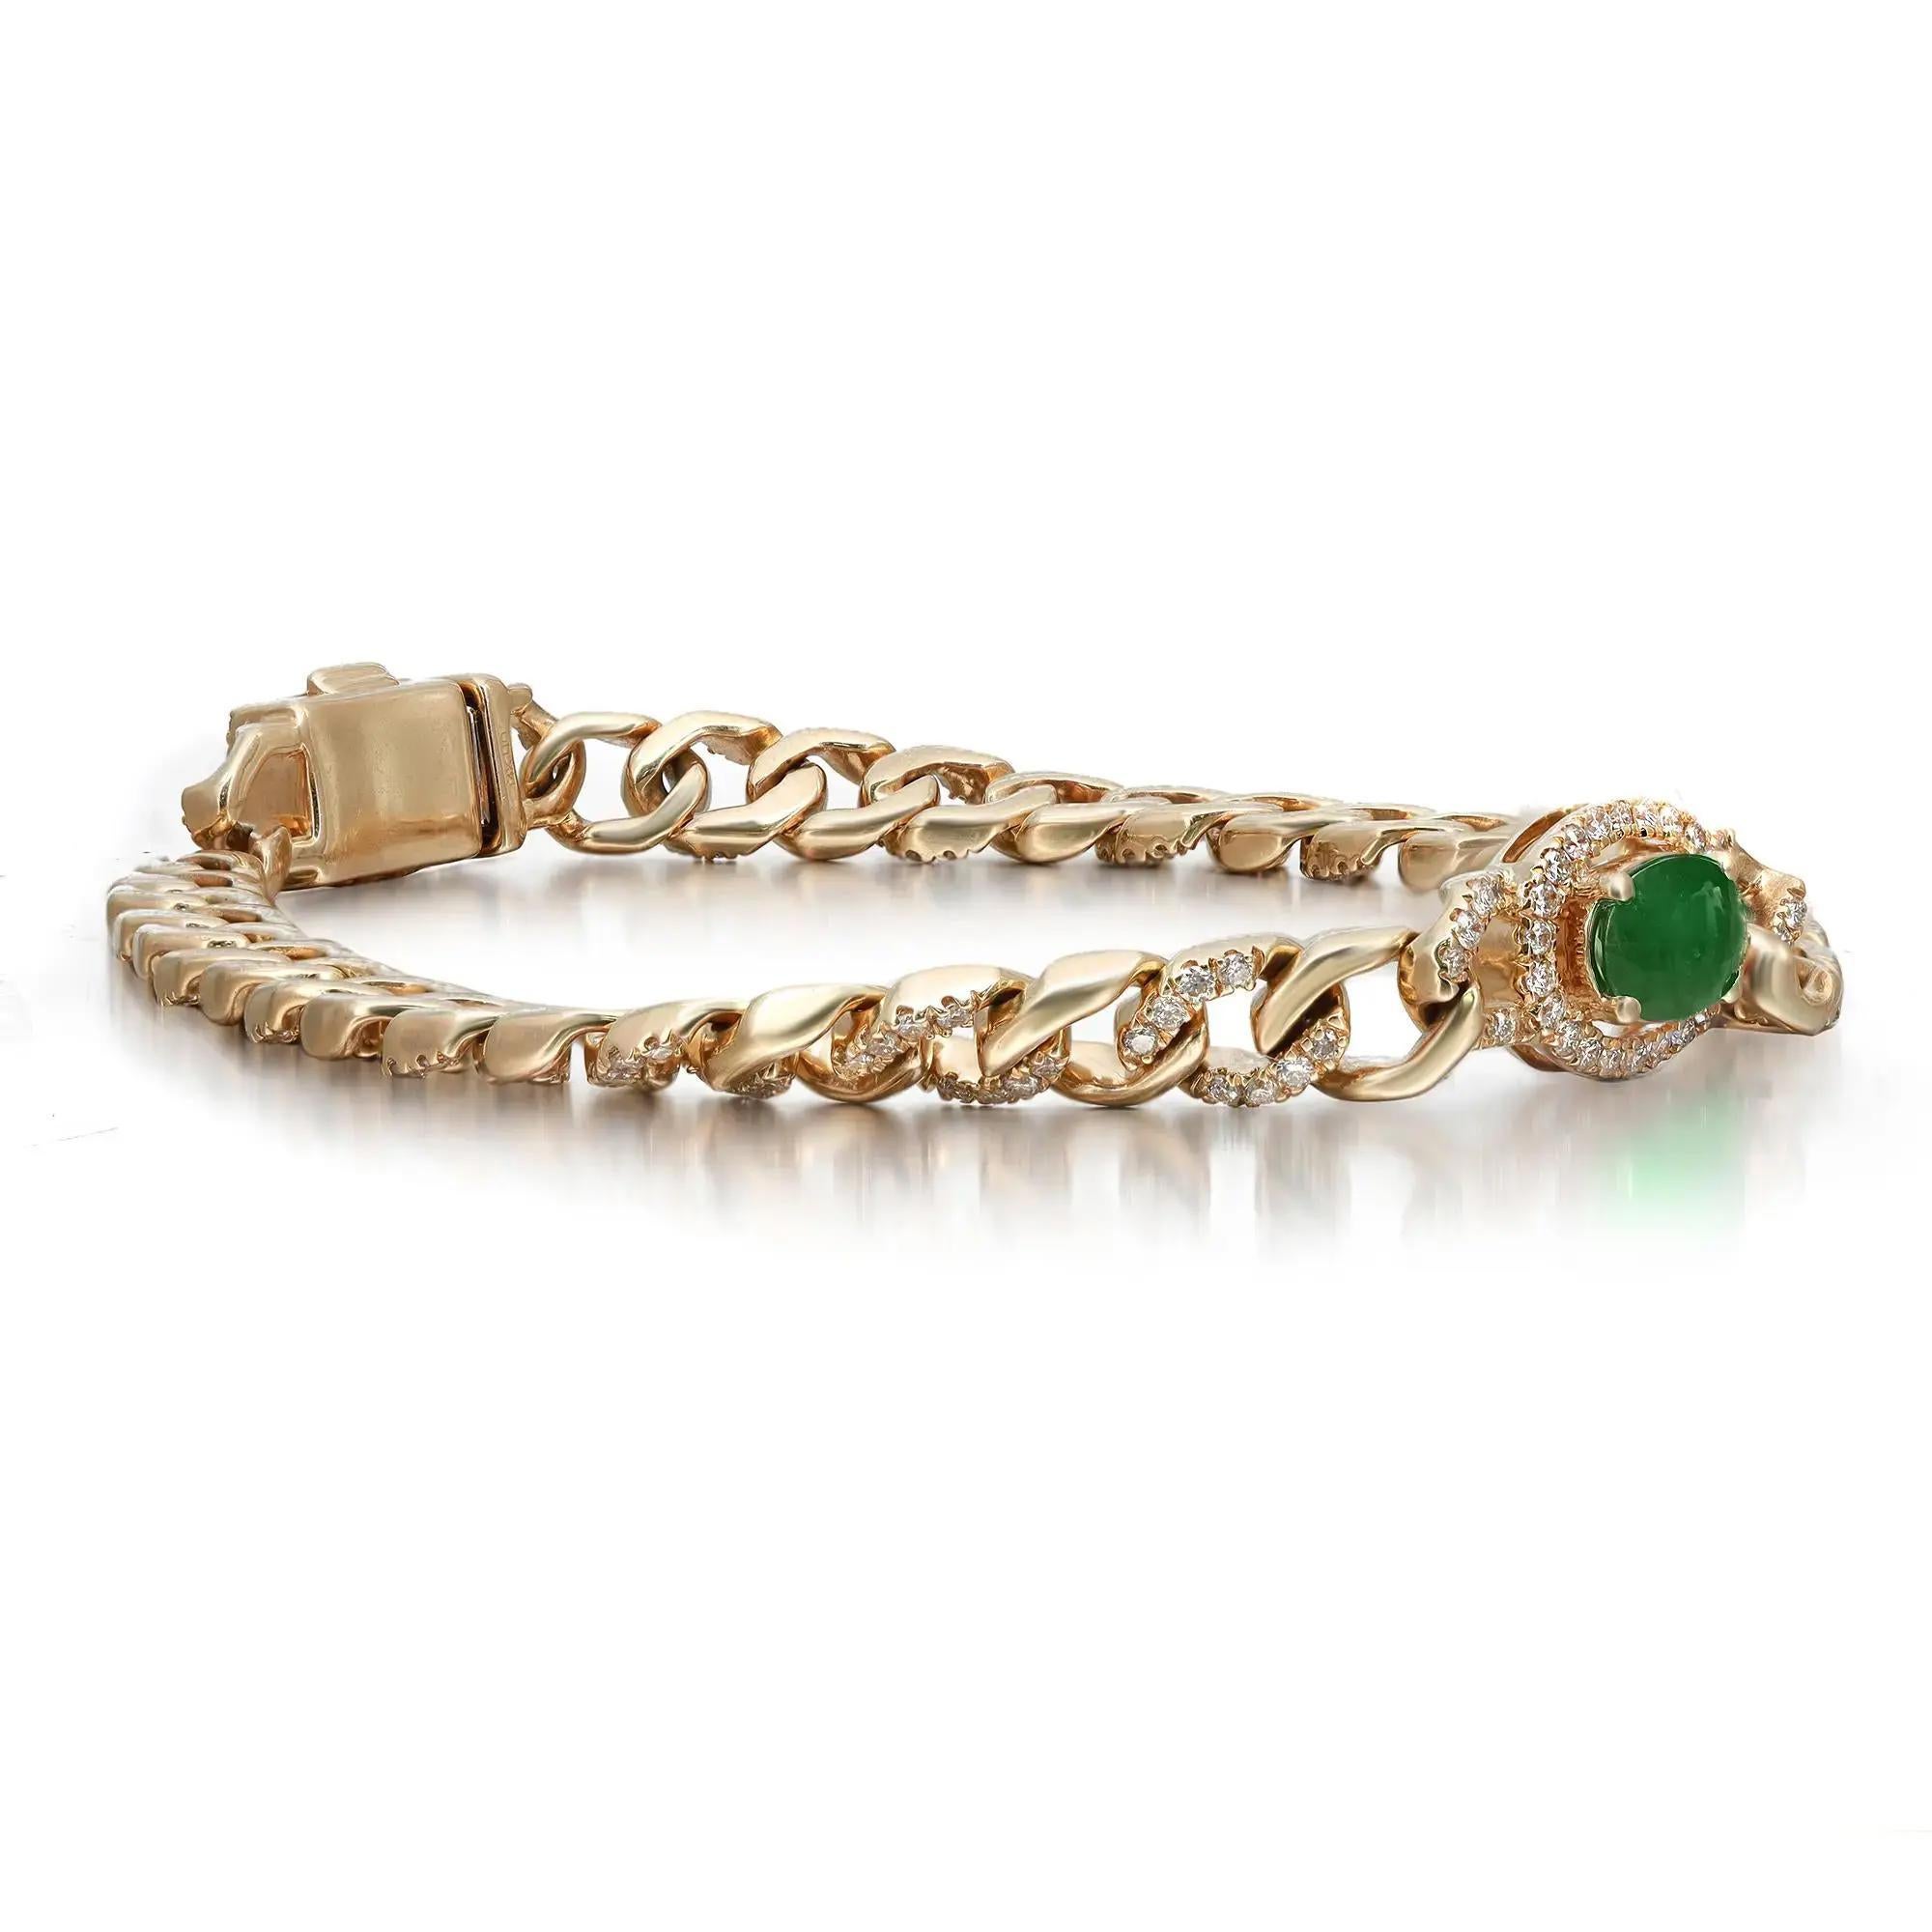 This beautifully crafted chain bracelet features a prong set oval shaped Emerald in the center with a round cut diamond halo attached to a pave set round diamond studded Cuban link chain. Crafted in 14k yellow gold. Total ruby weight: 0.94 carat.